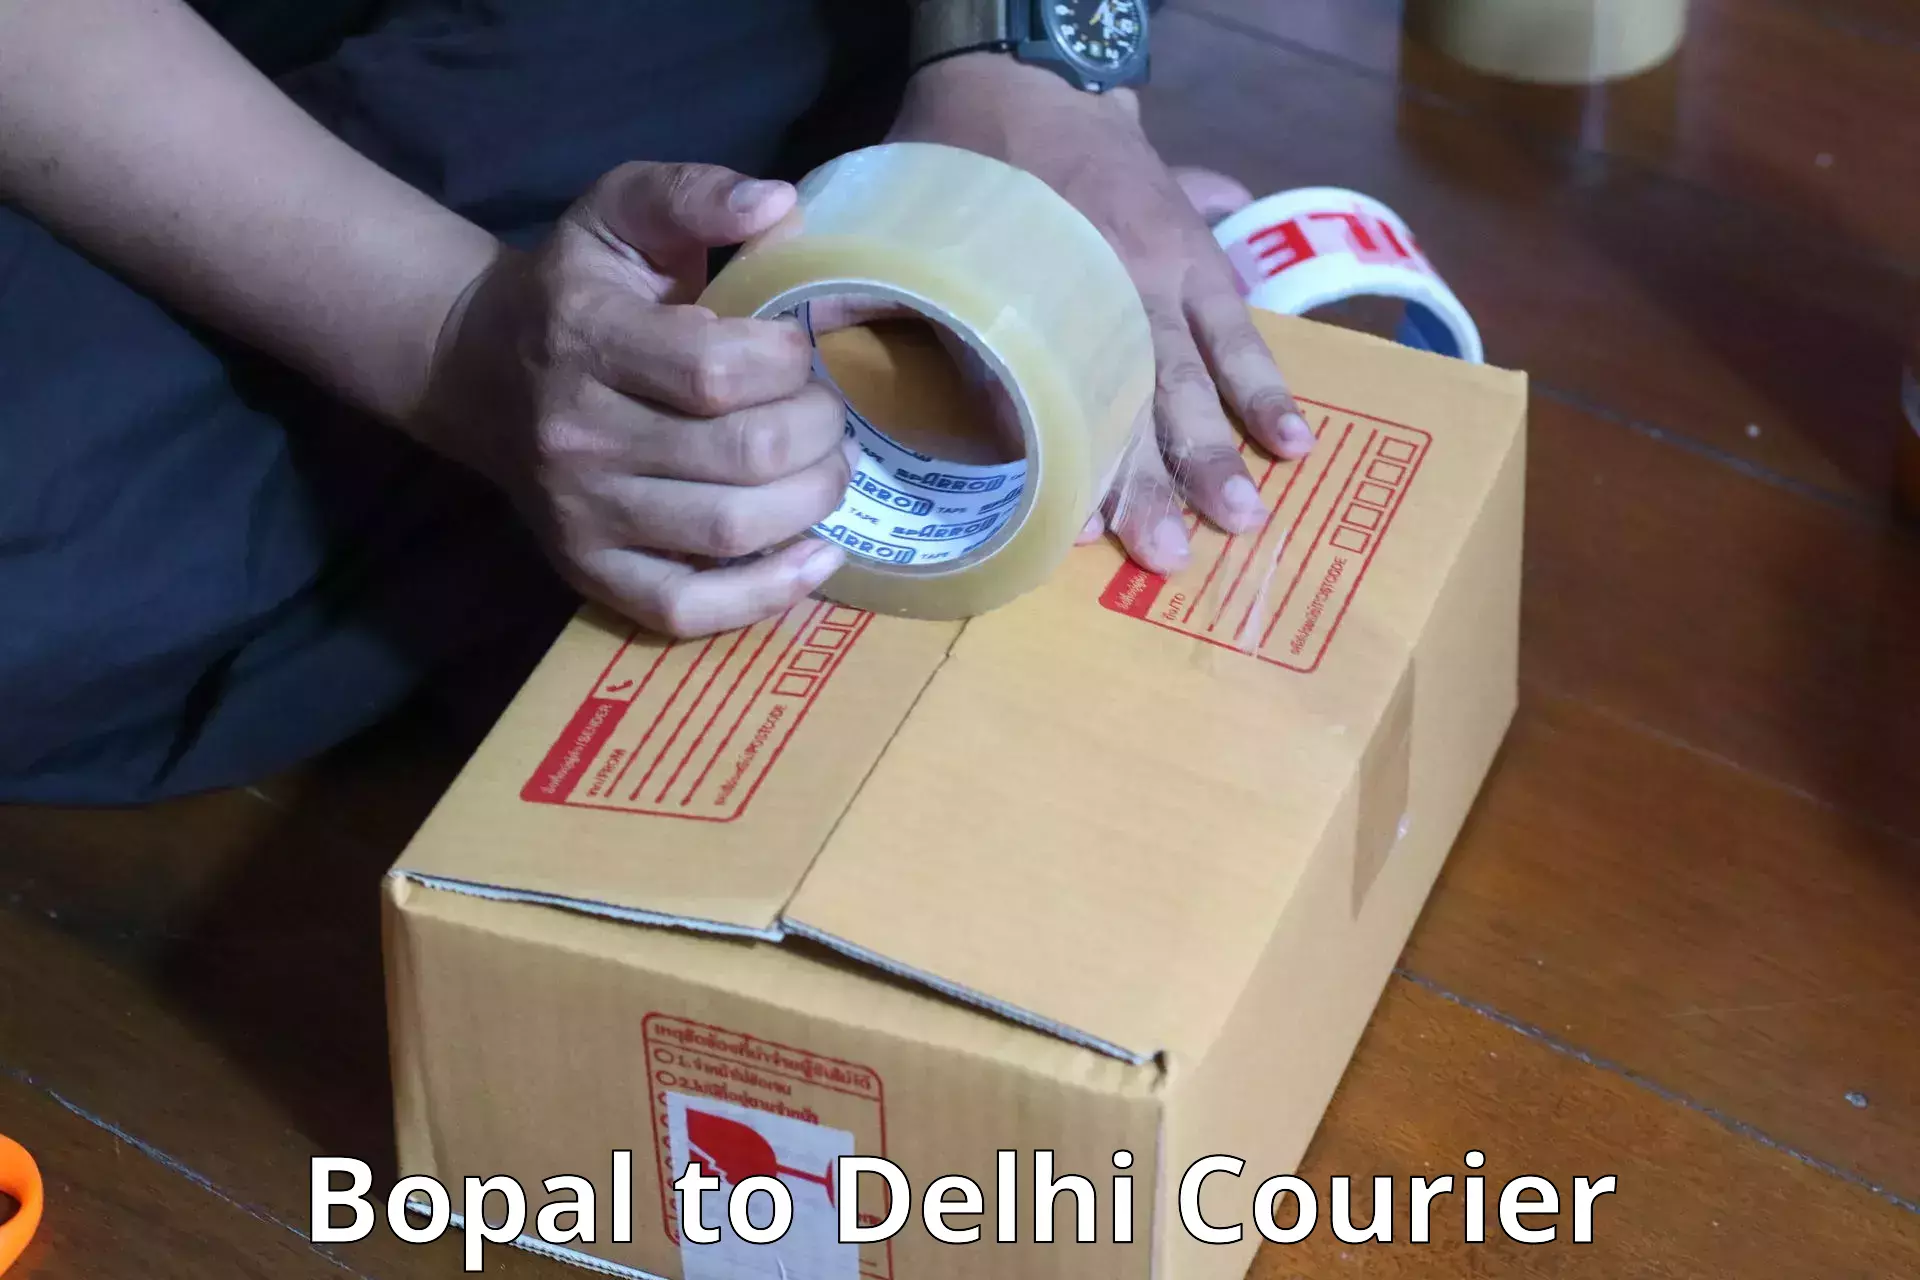 Luggage shipping specialists Bopal to Delhi